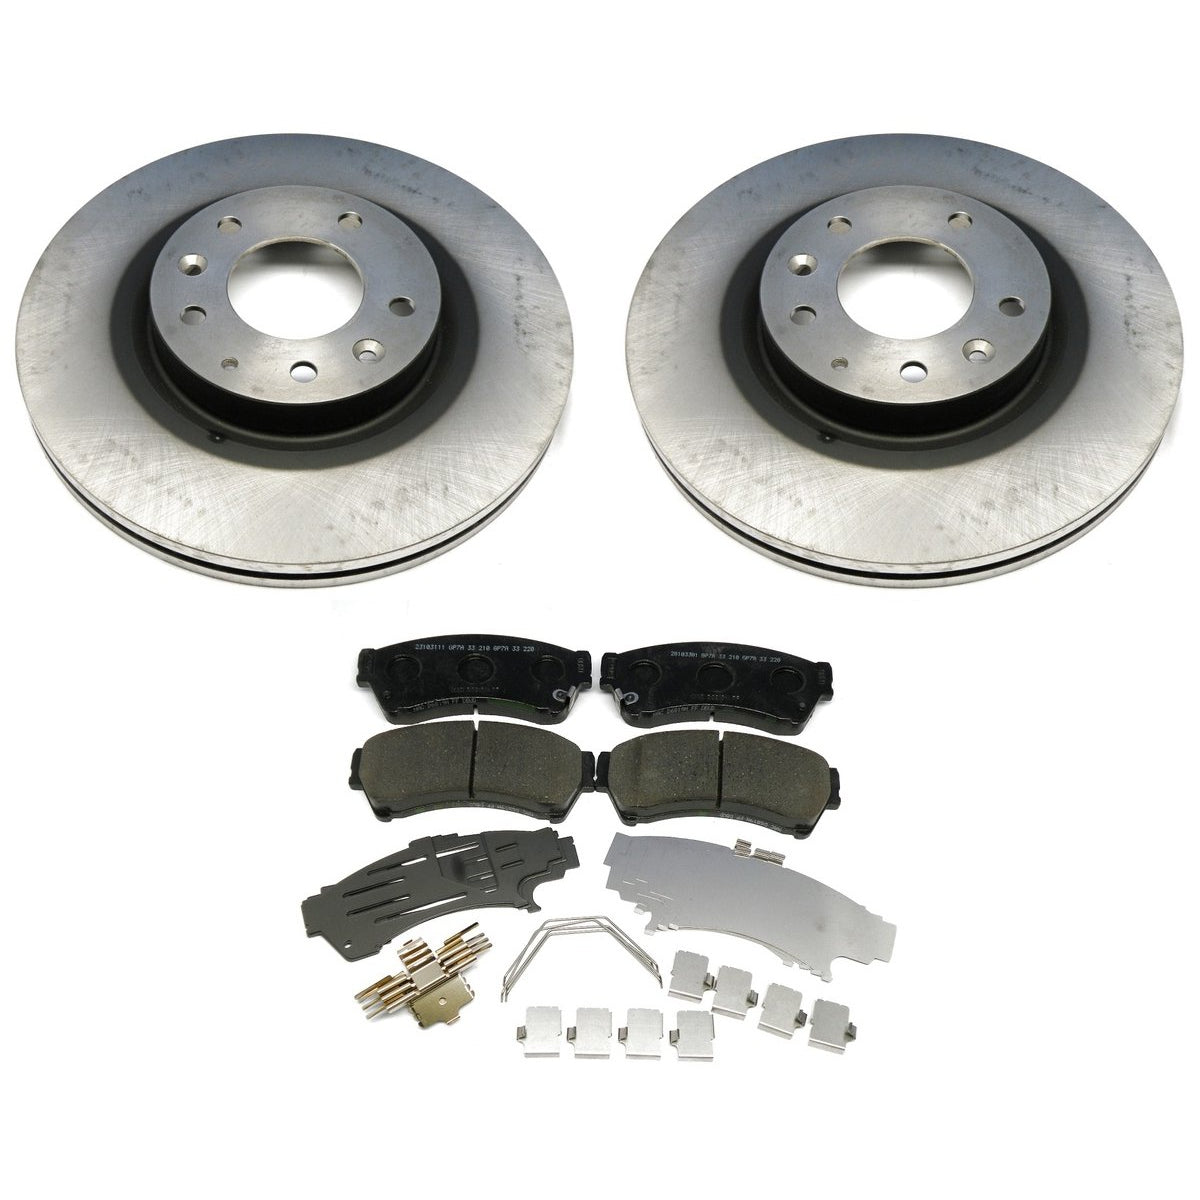 Brake Package, Front: Pads, Rotors & Attachment Kit | Mazda6 (2014